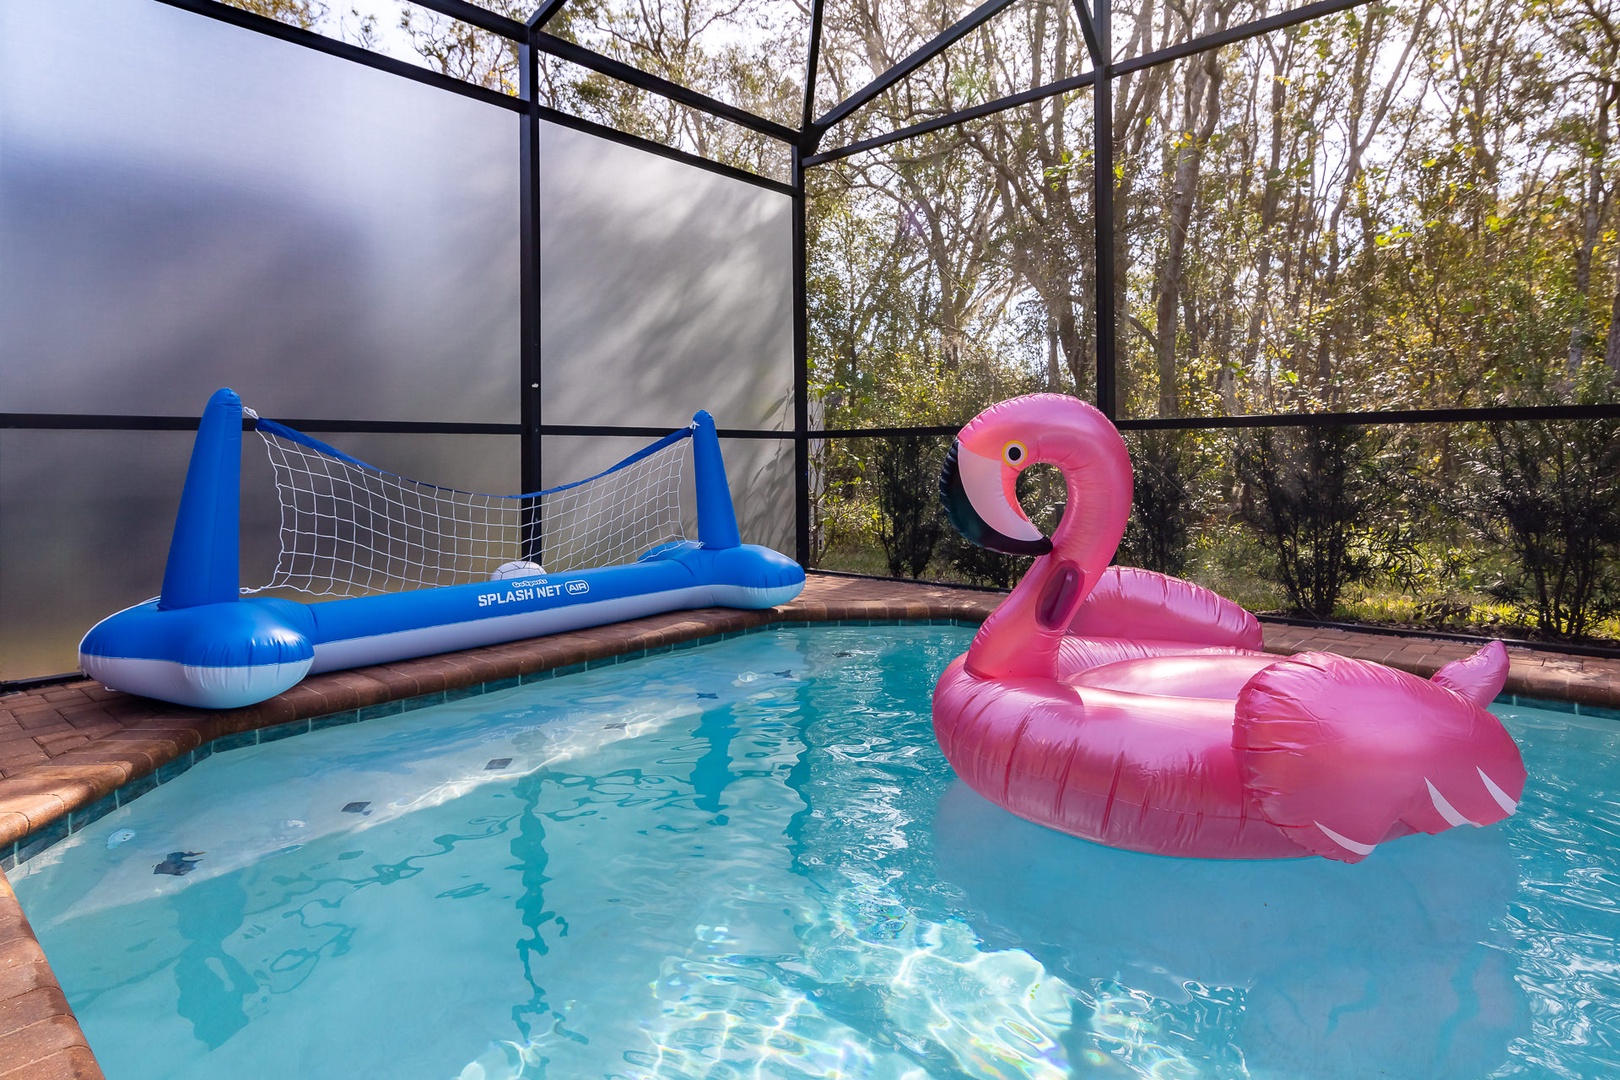 Pool games and flamingo floater